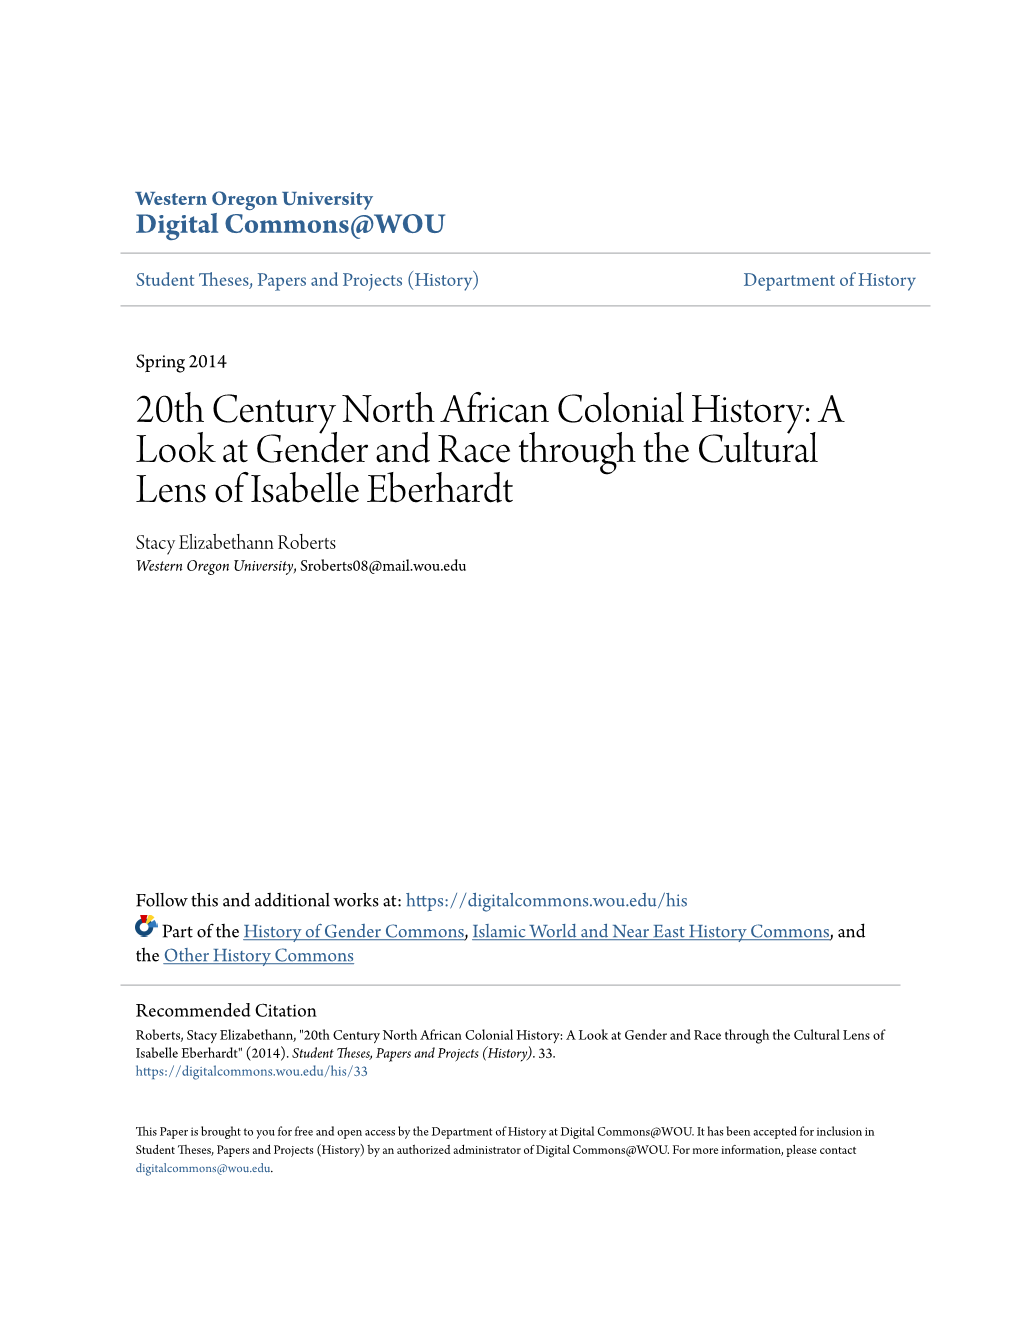 20Th Century North African Colonial History: a Look at Gender and Race